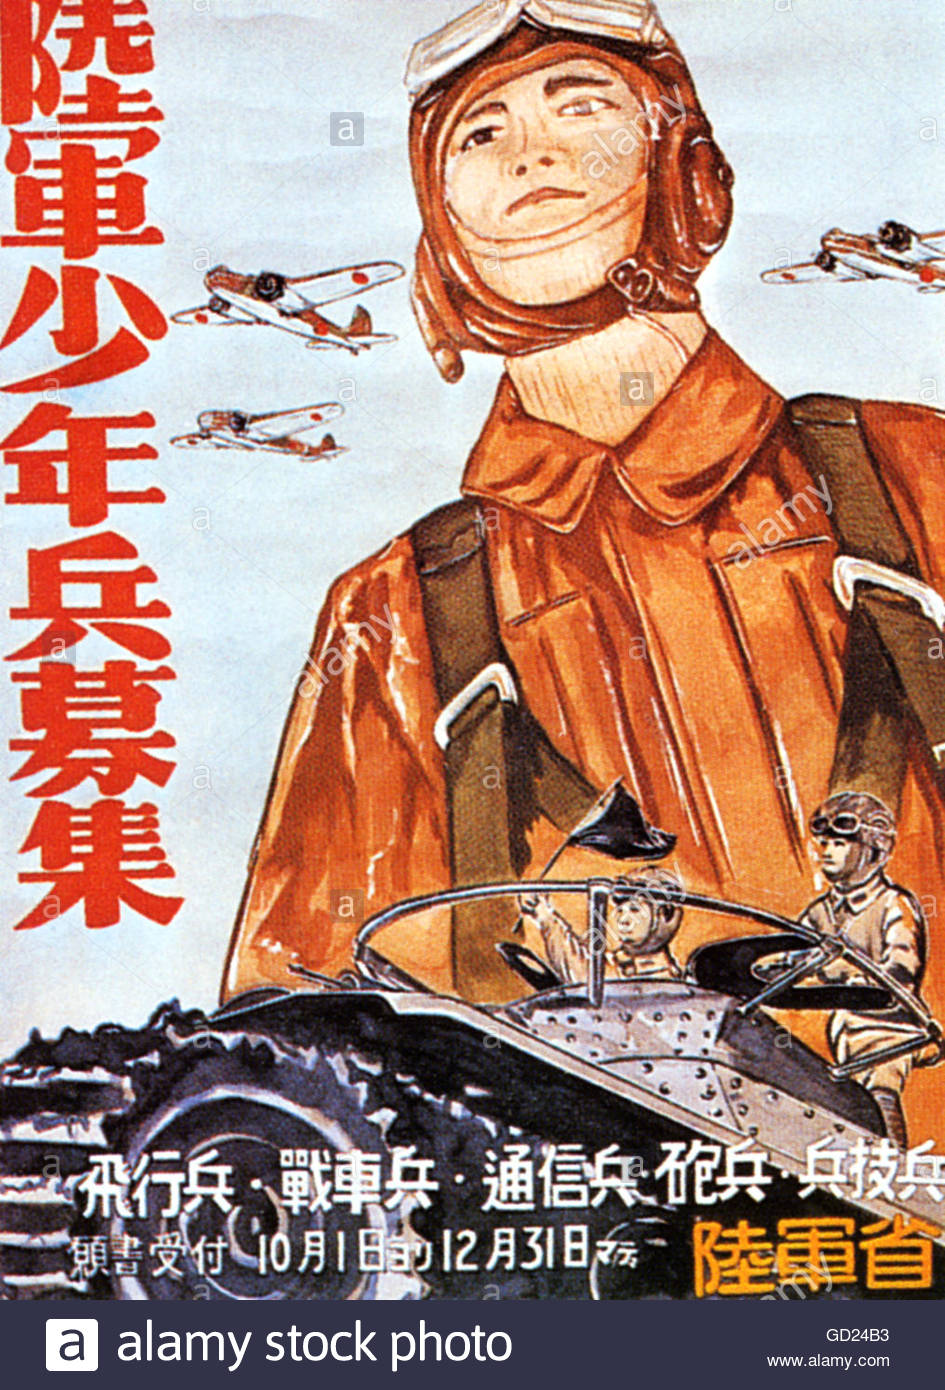 Japan Wwii Poster Stock Photos Japan Wwii Poster Stock Images